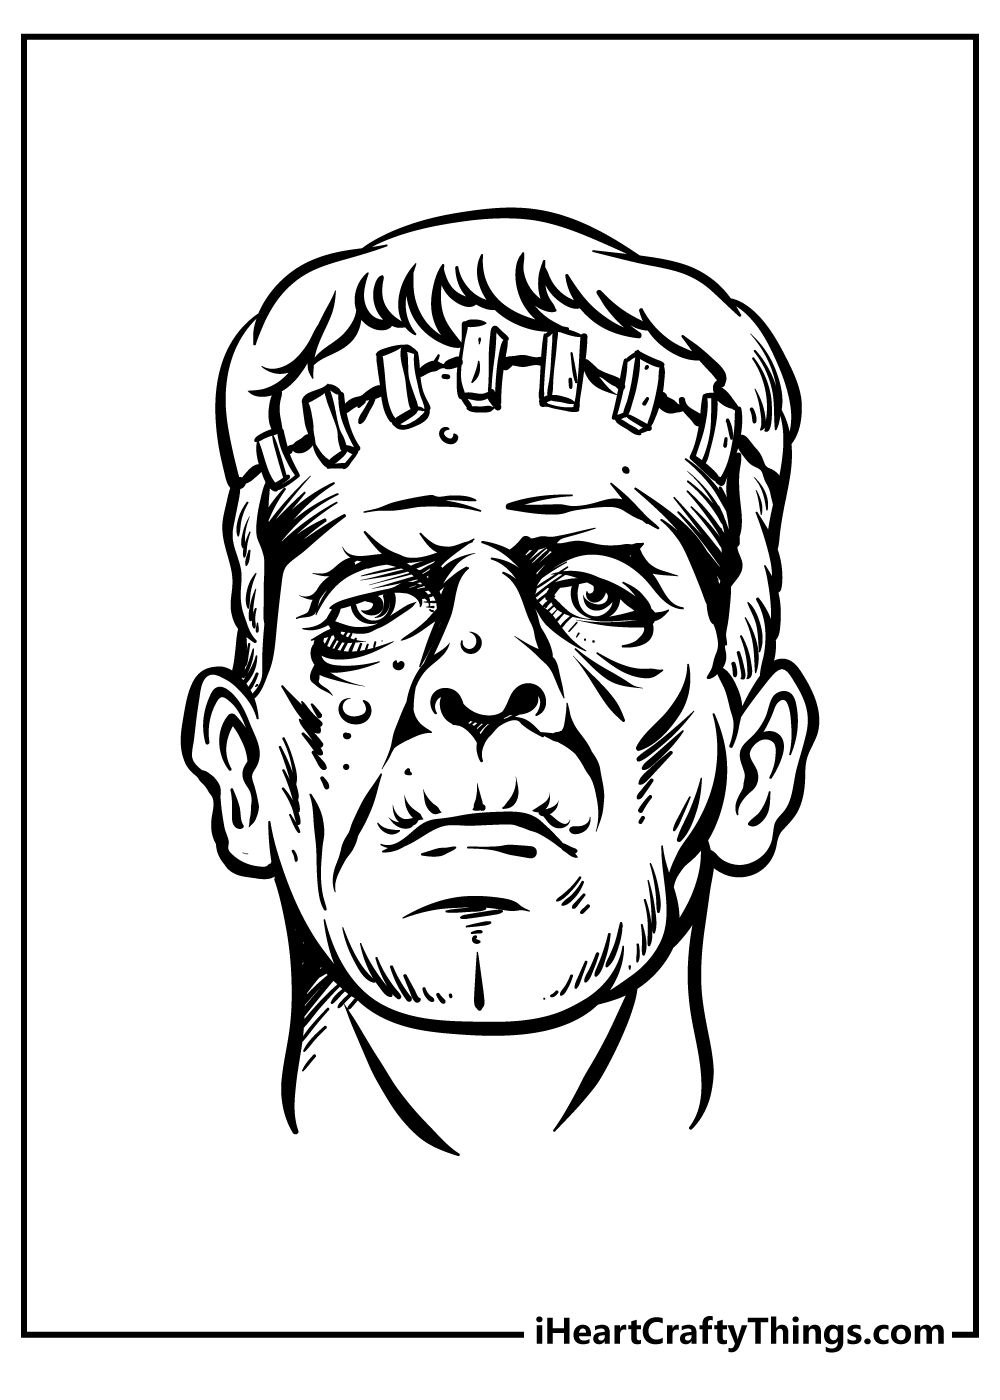 Frankenstein coloring pages free printables